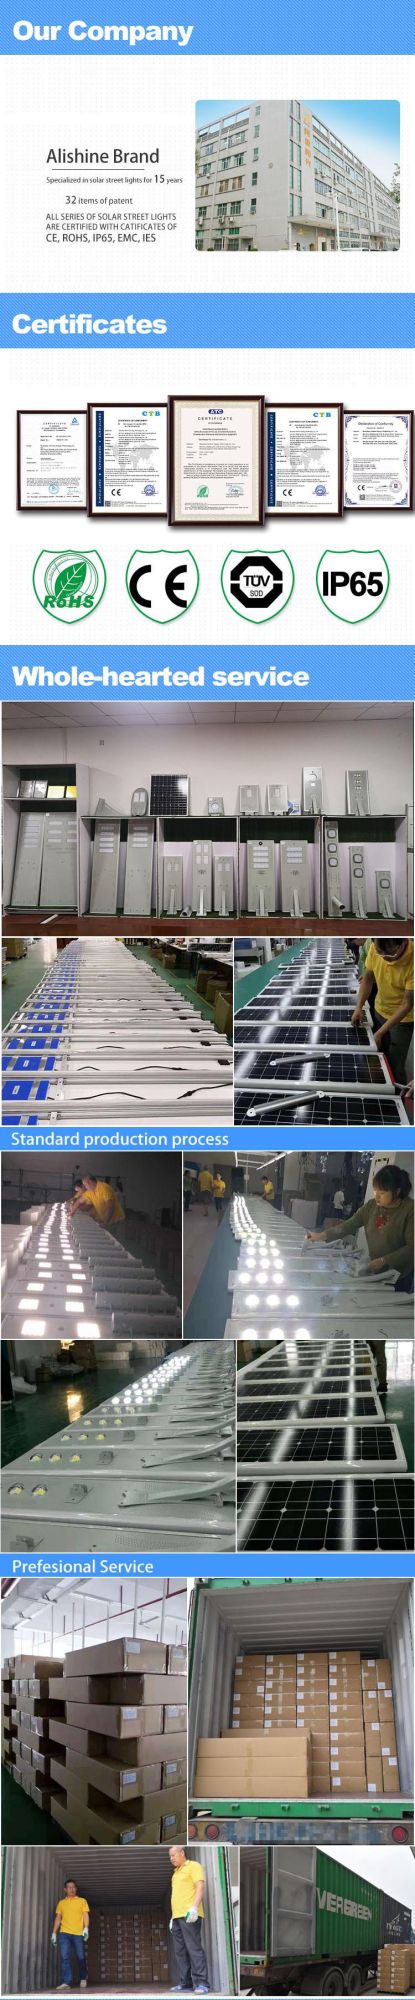 Solar Cell Panel System Rechargeable LED Lights with IP65 Waterproof